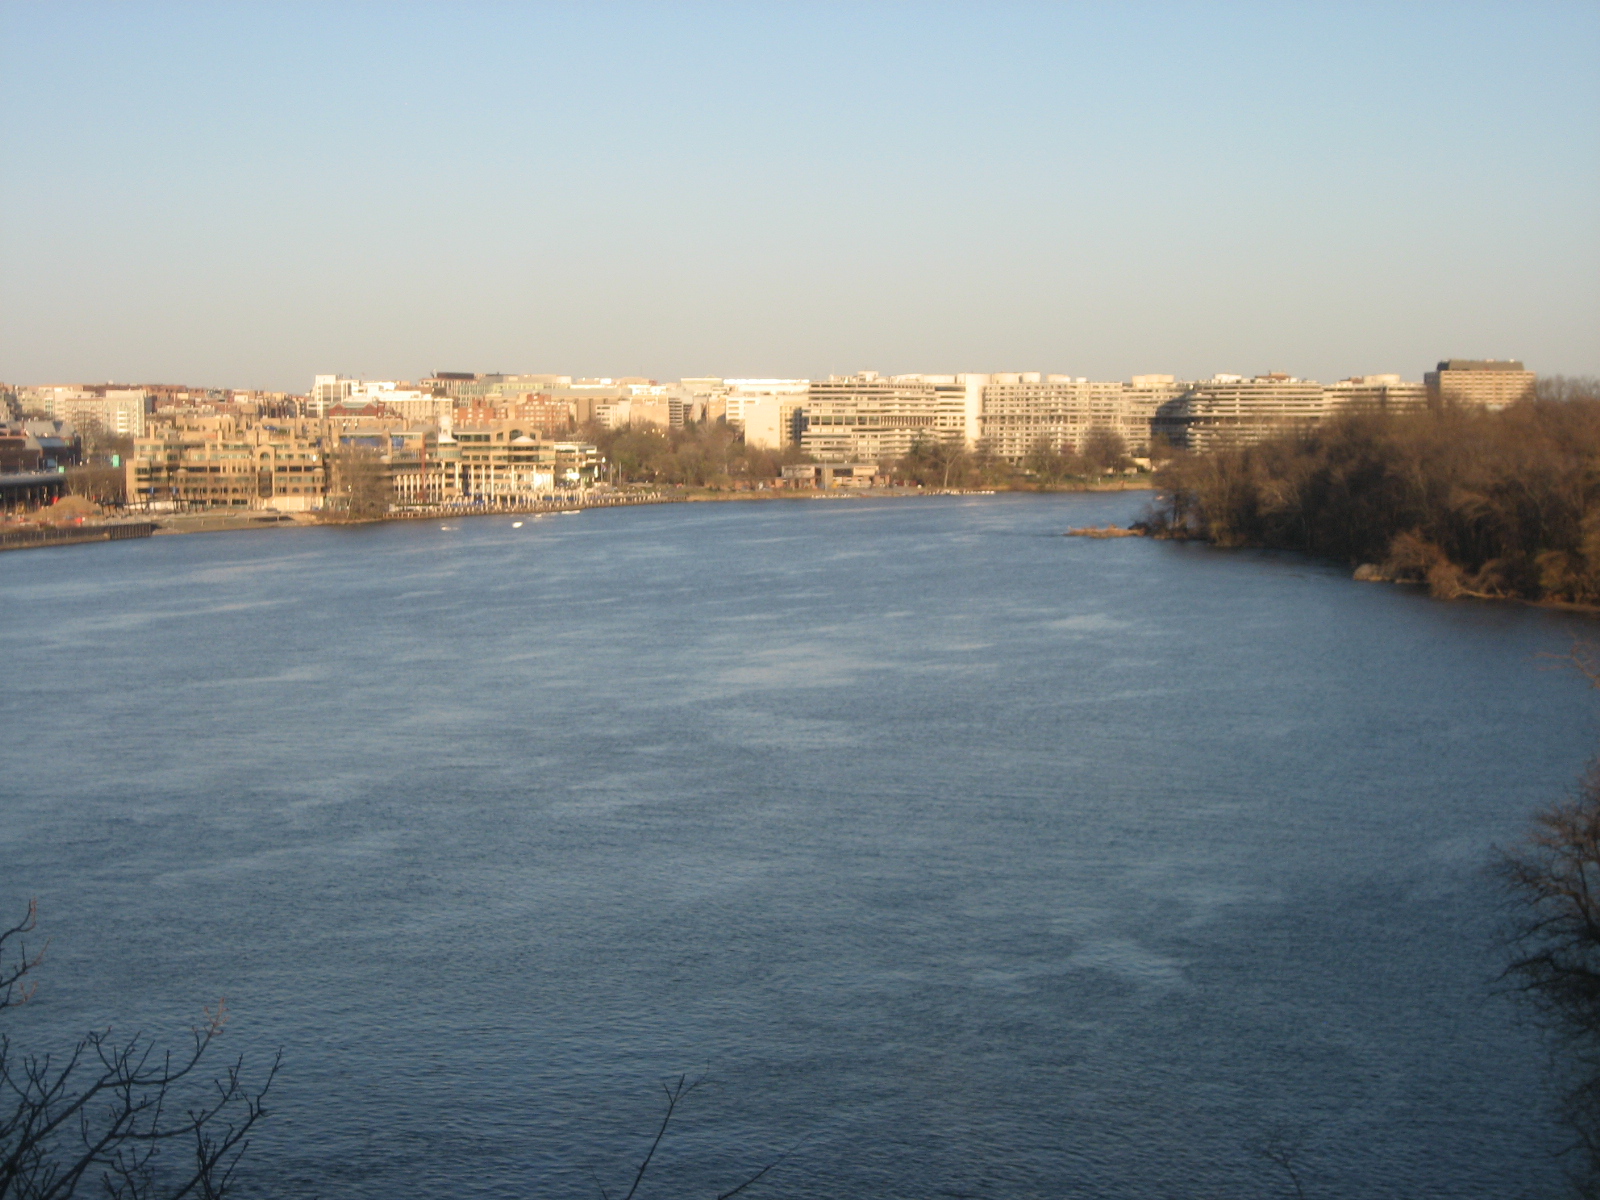 Looking towards Watergate from the Key Bridge above the Potomac